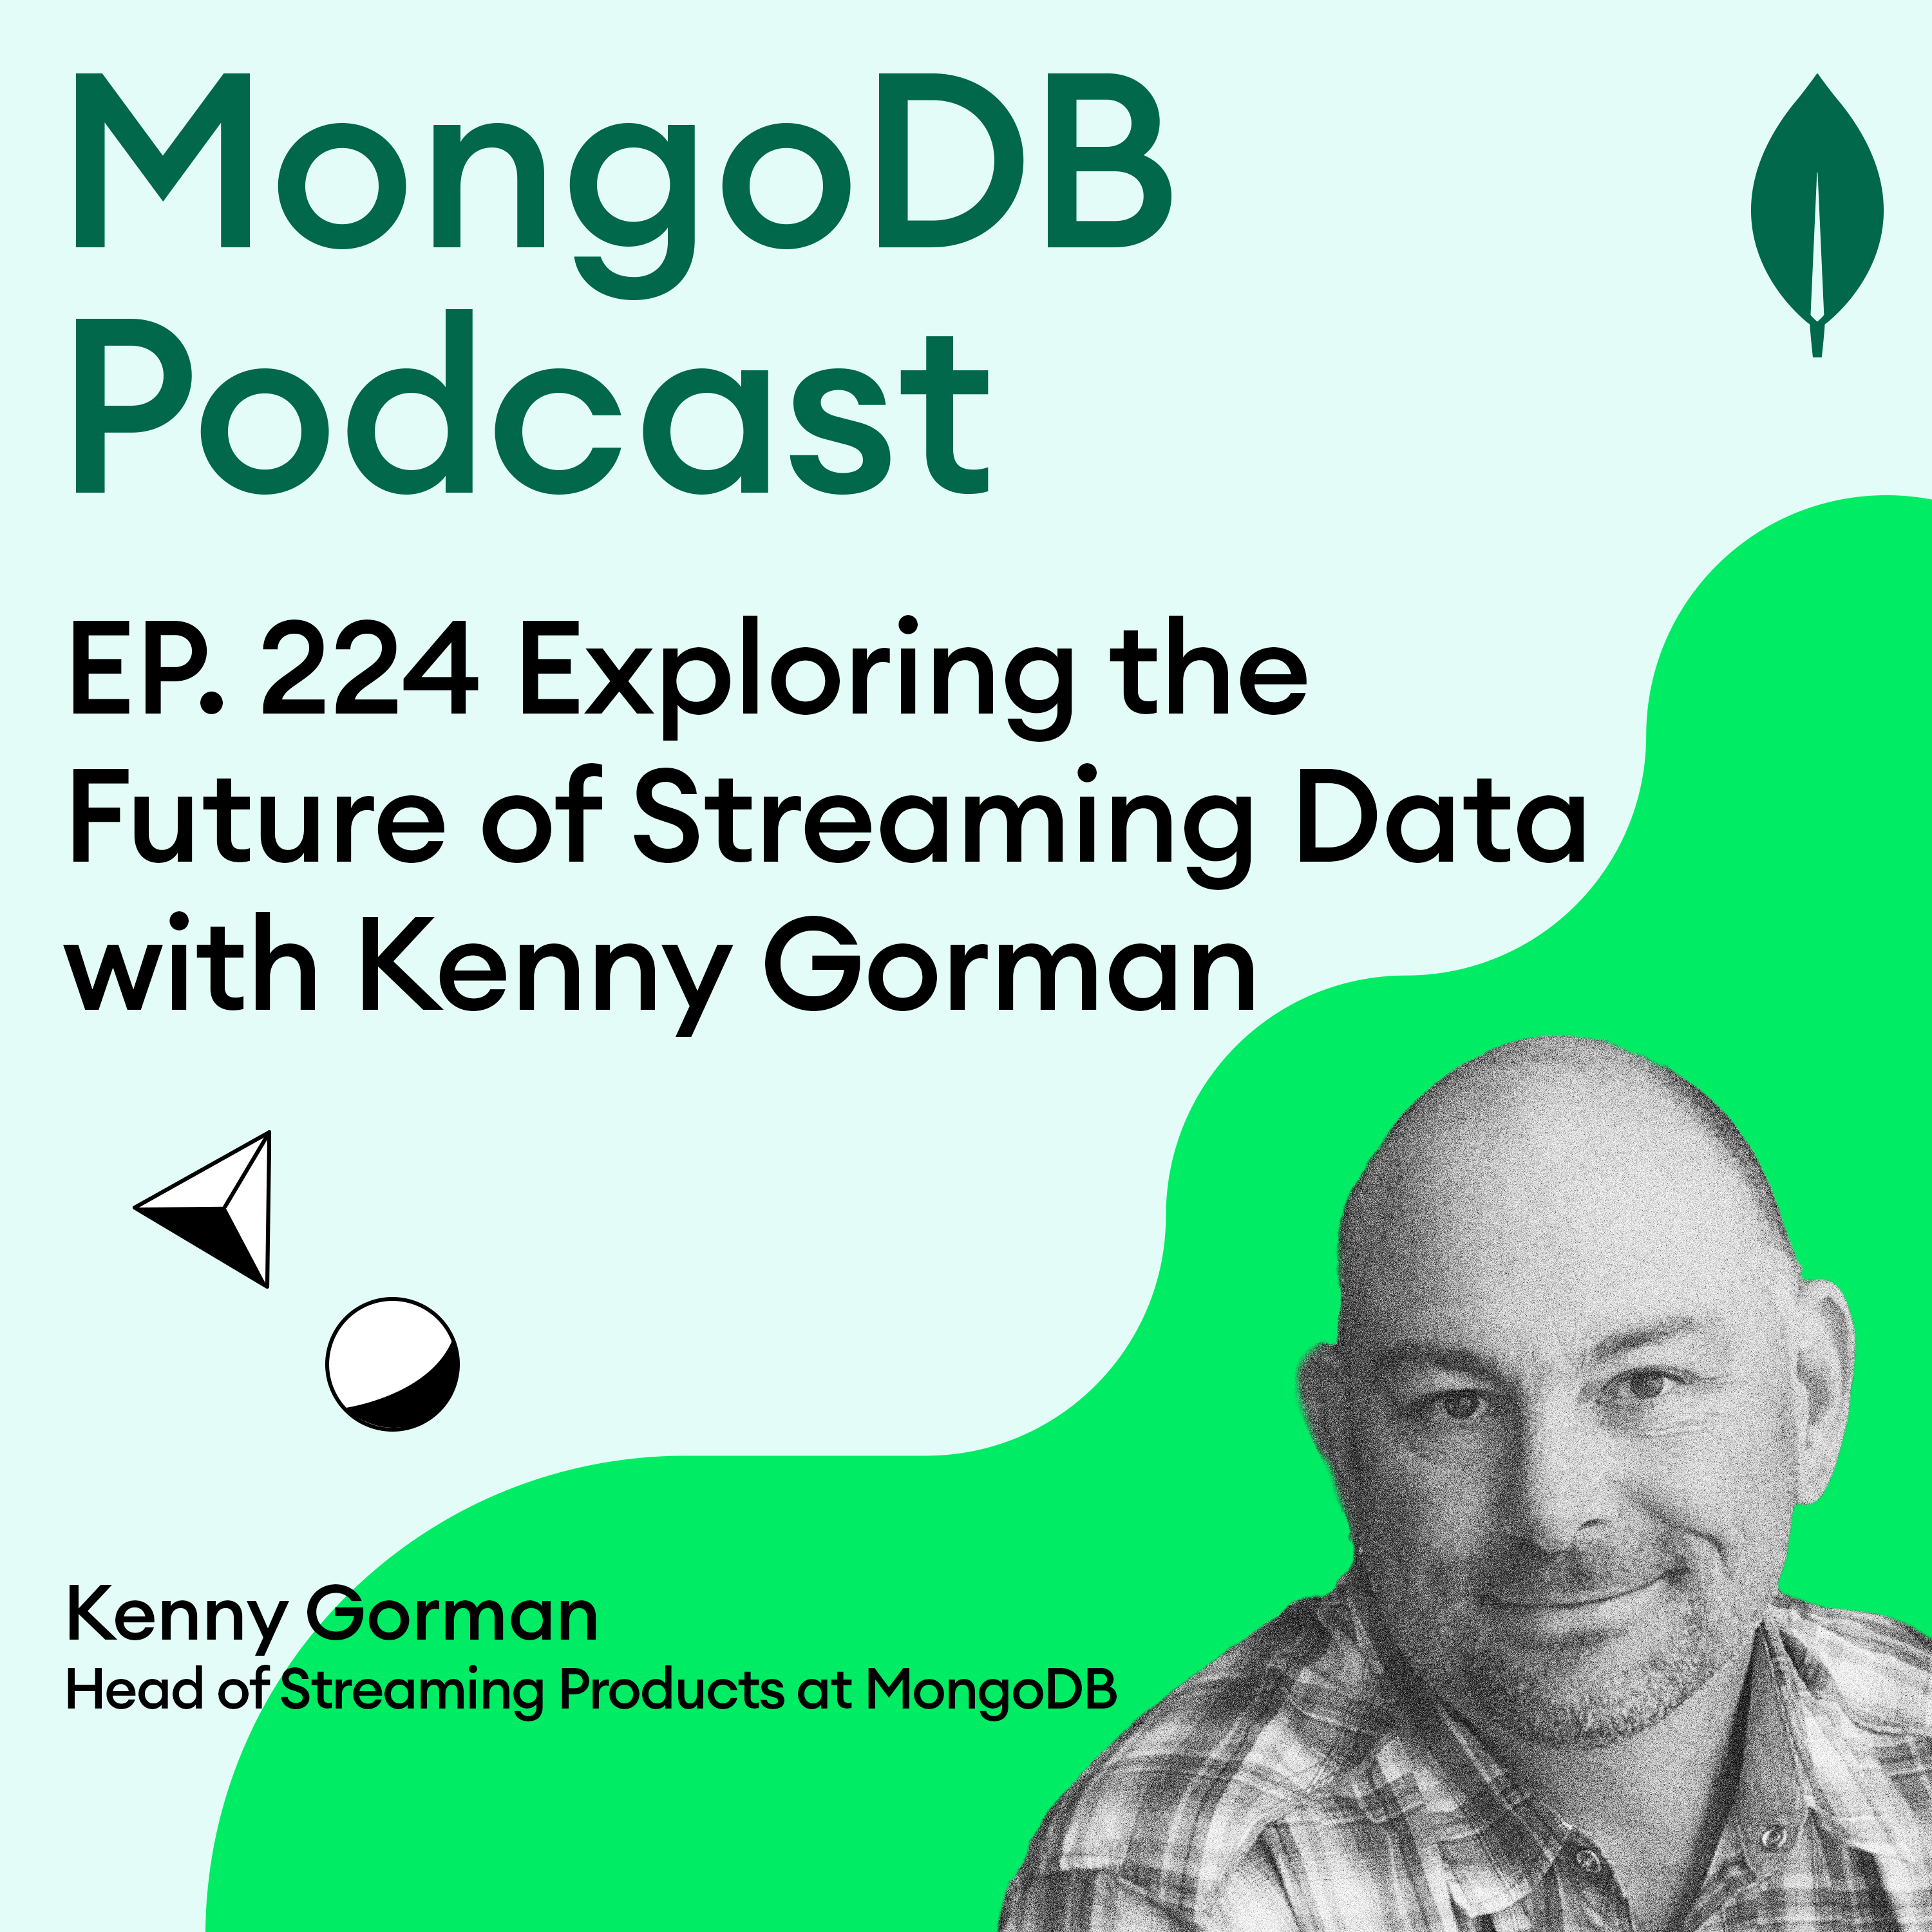 EP. 224 Exploring the Future of Streaming Data with Kenny Gorman